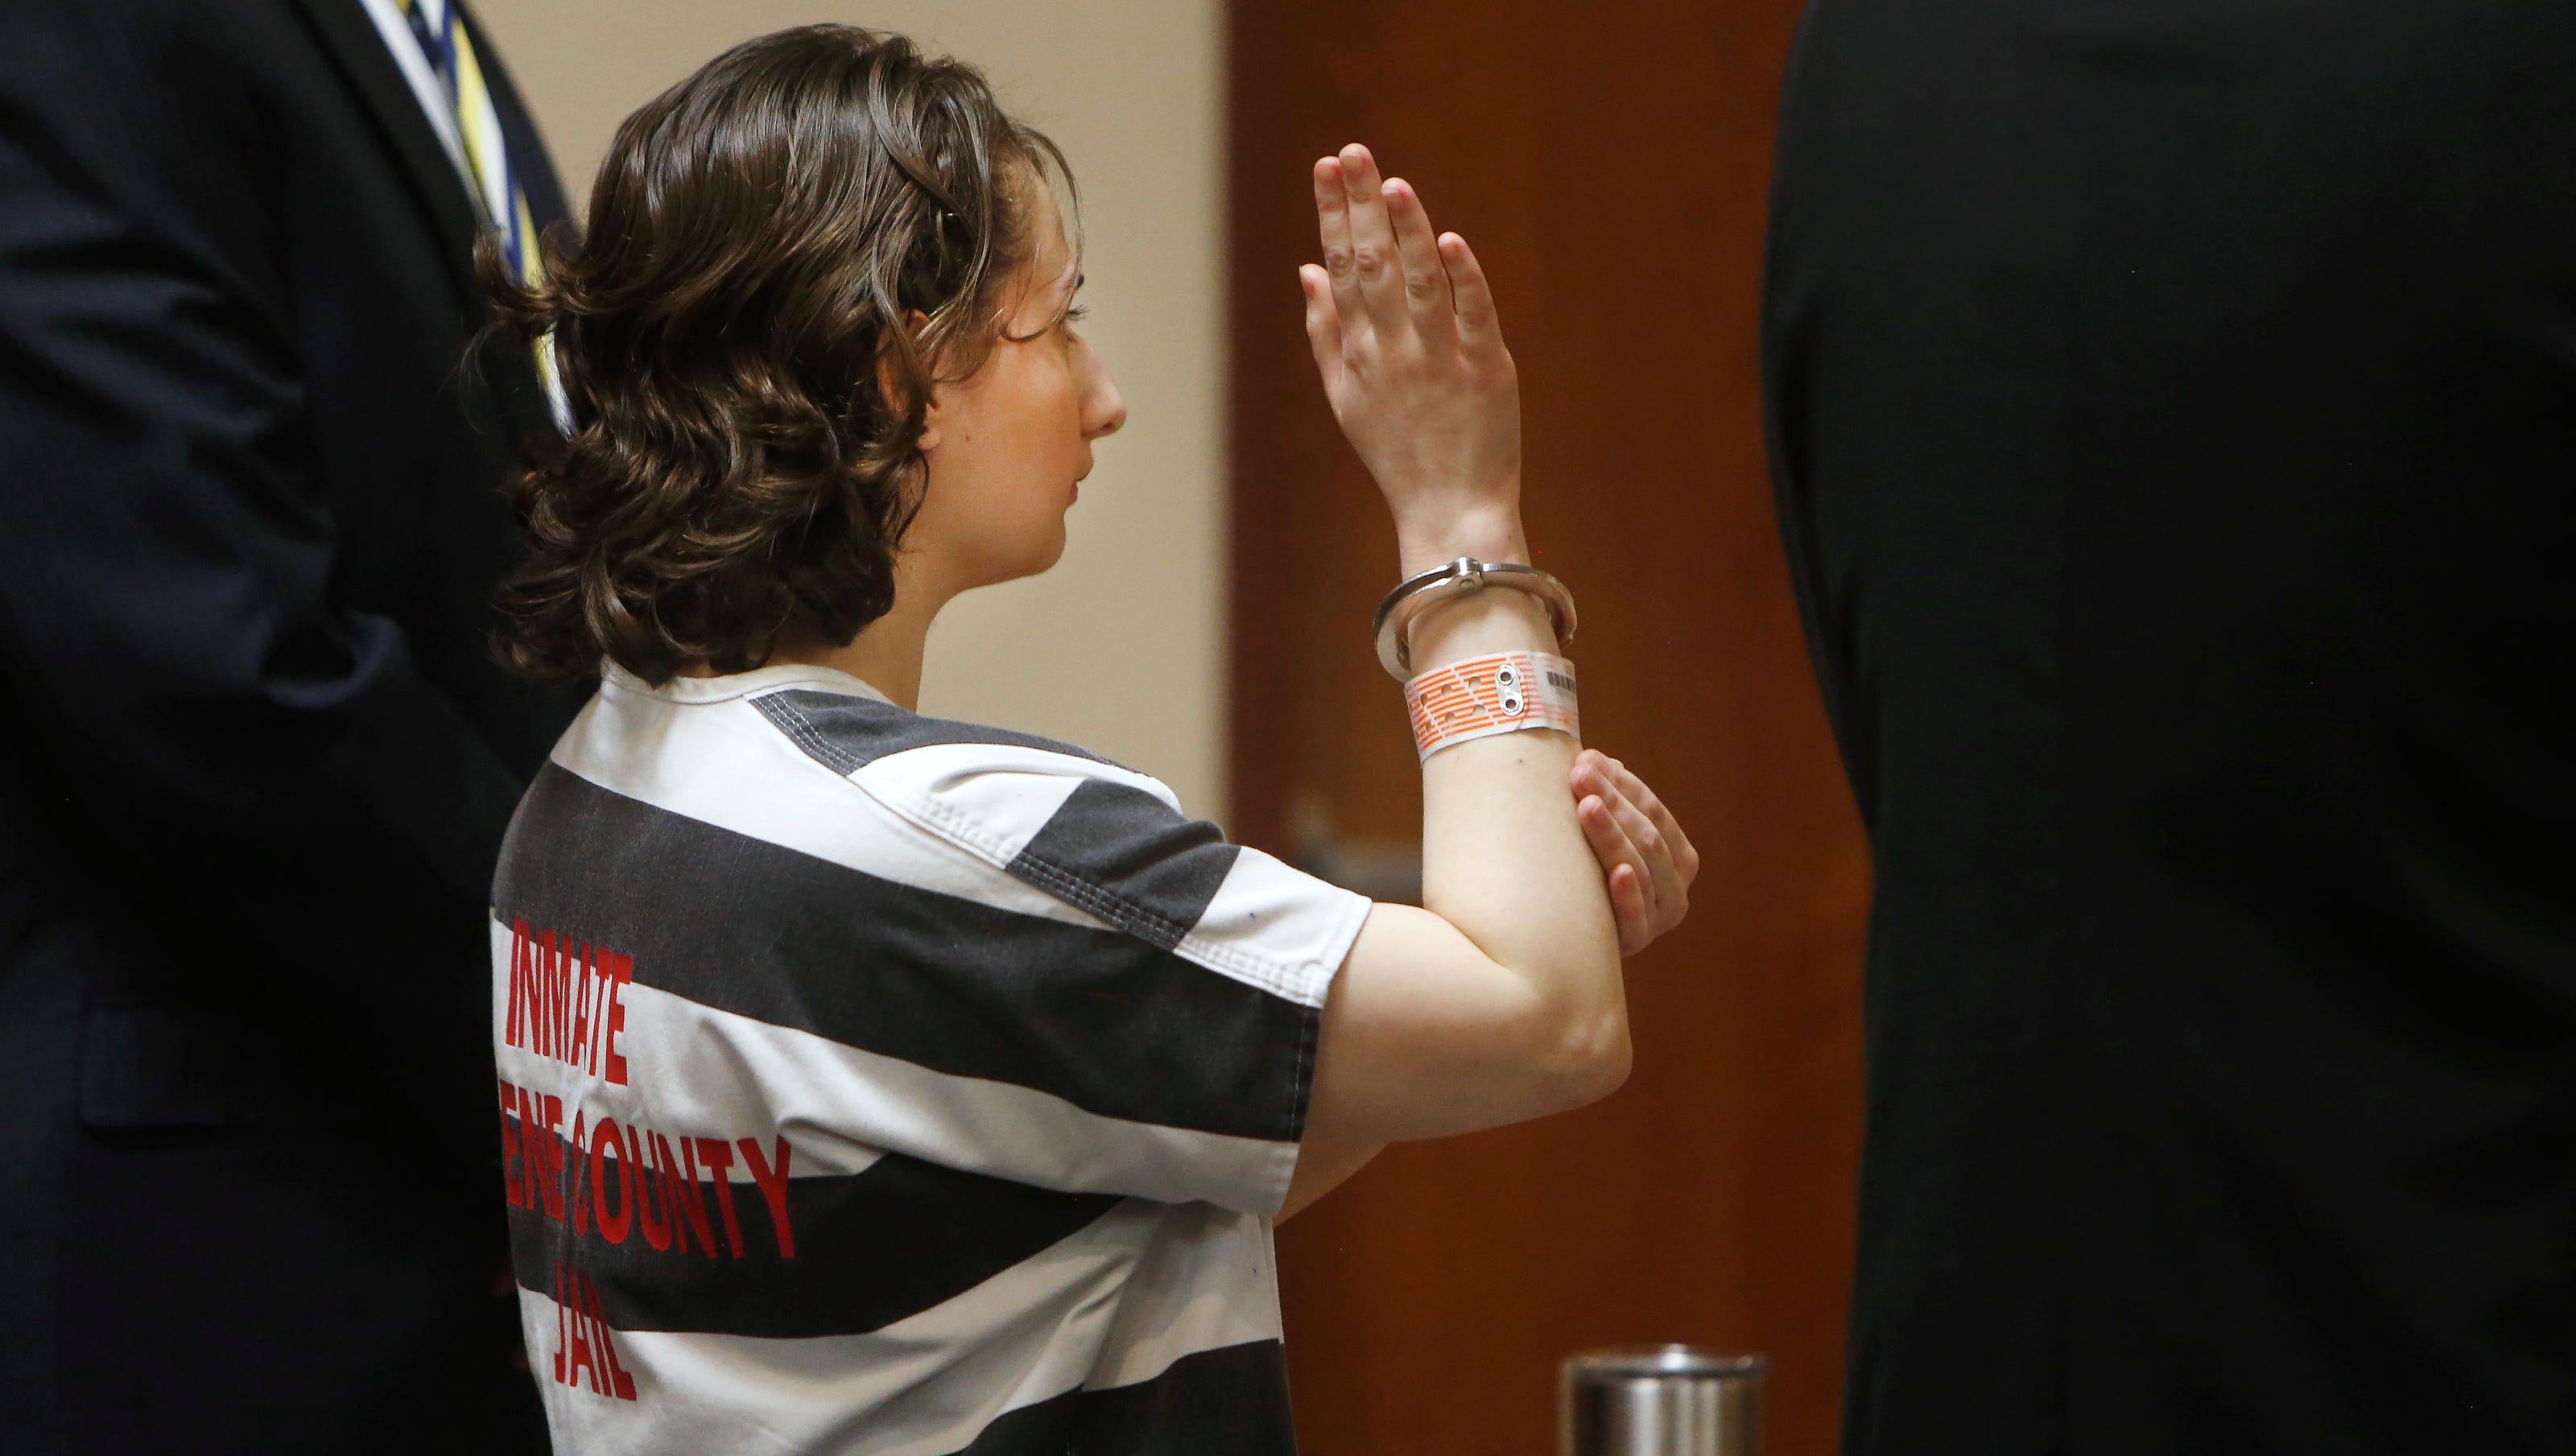 In 'extraordinary' case, Gypsy Blanchard gets 10 years for murdering mother